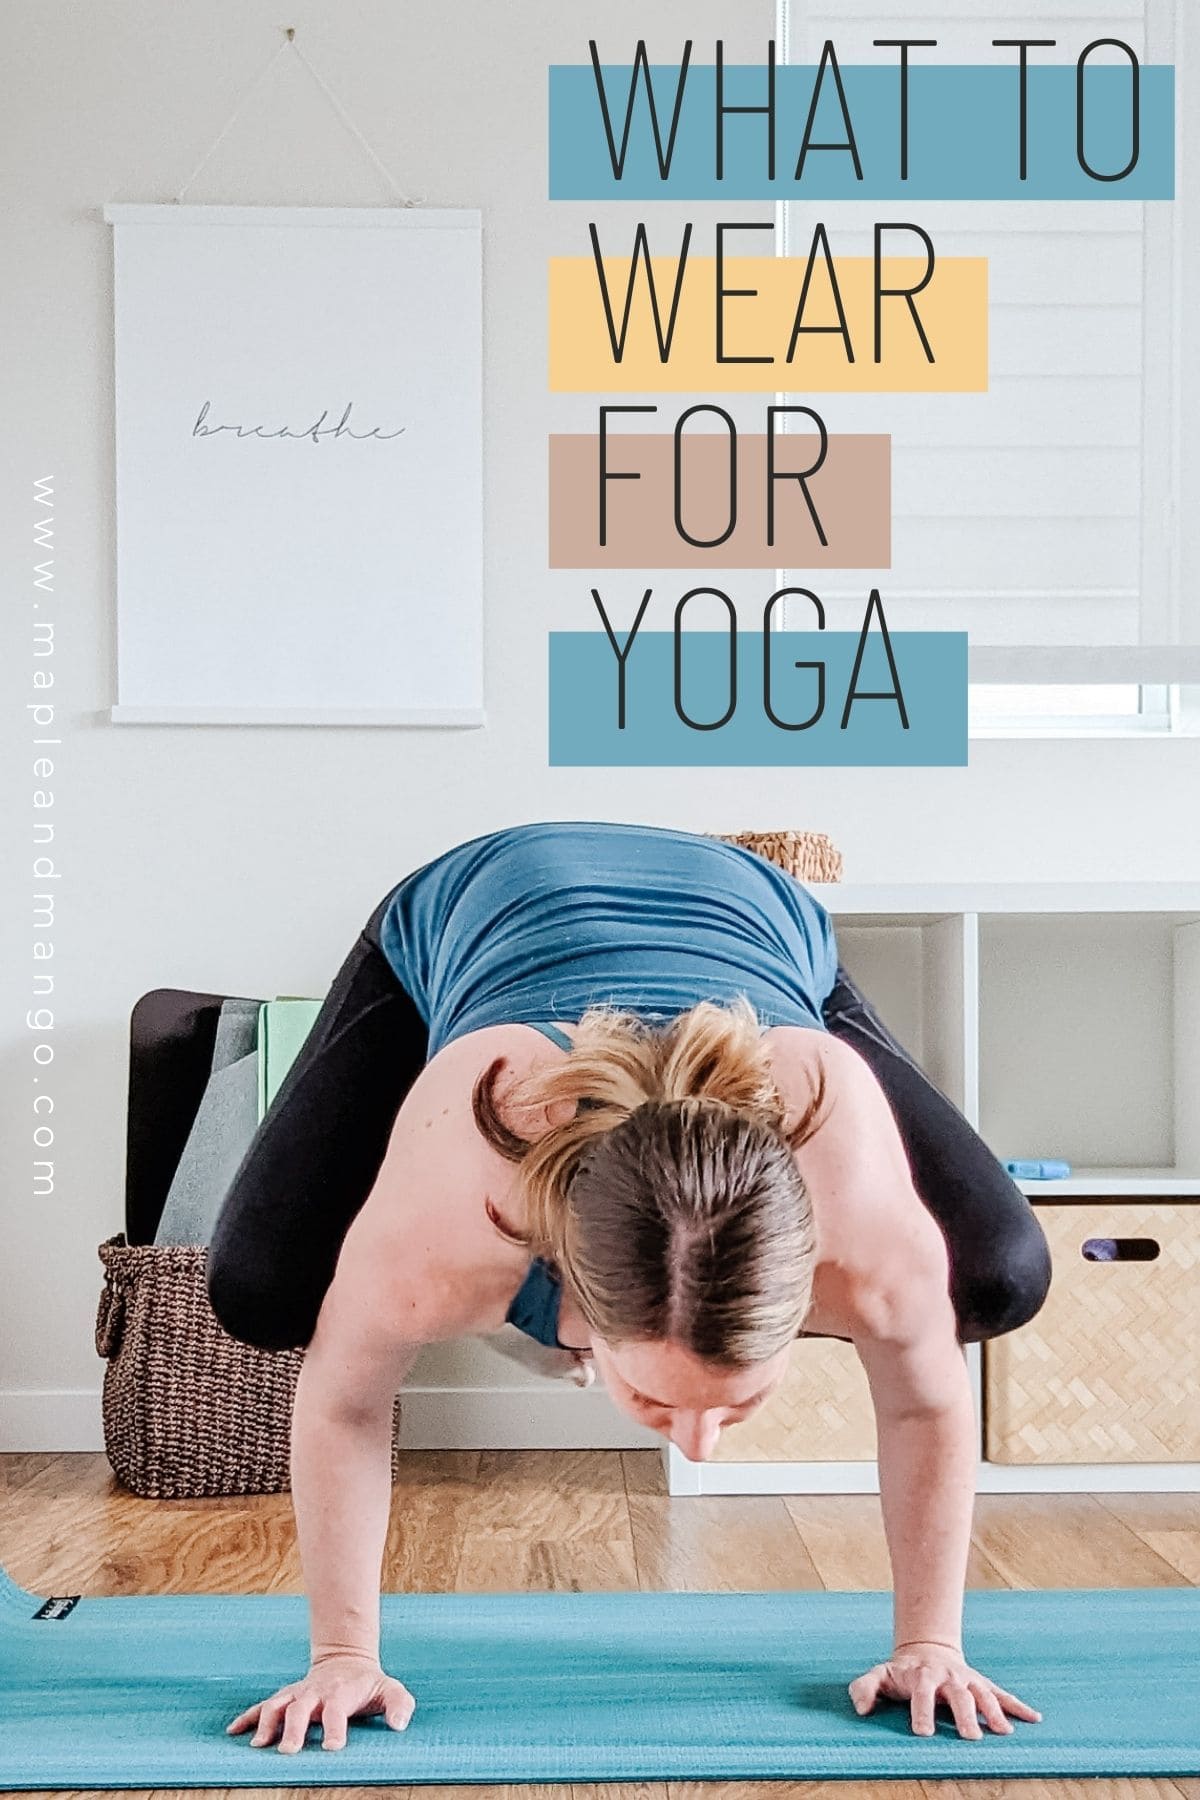 Woman in yoga crow pose with text overlay that reads "What To Wear For Yoga".